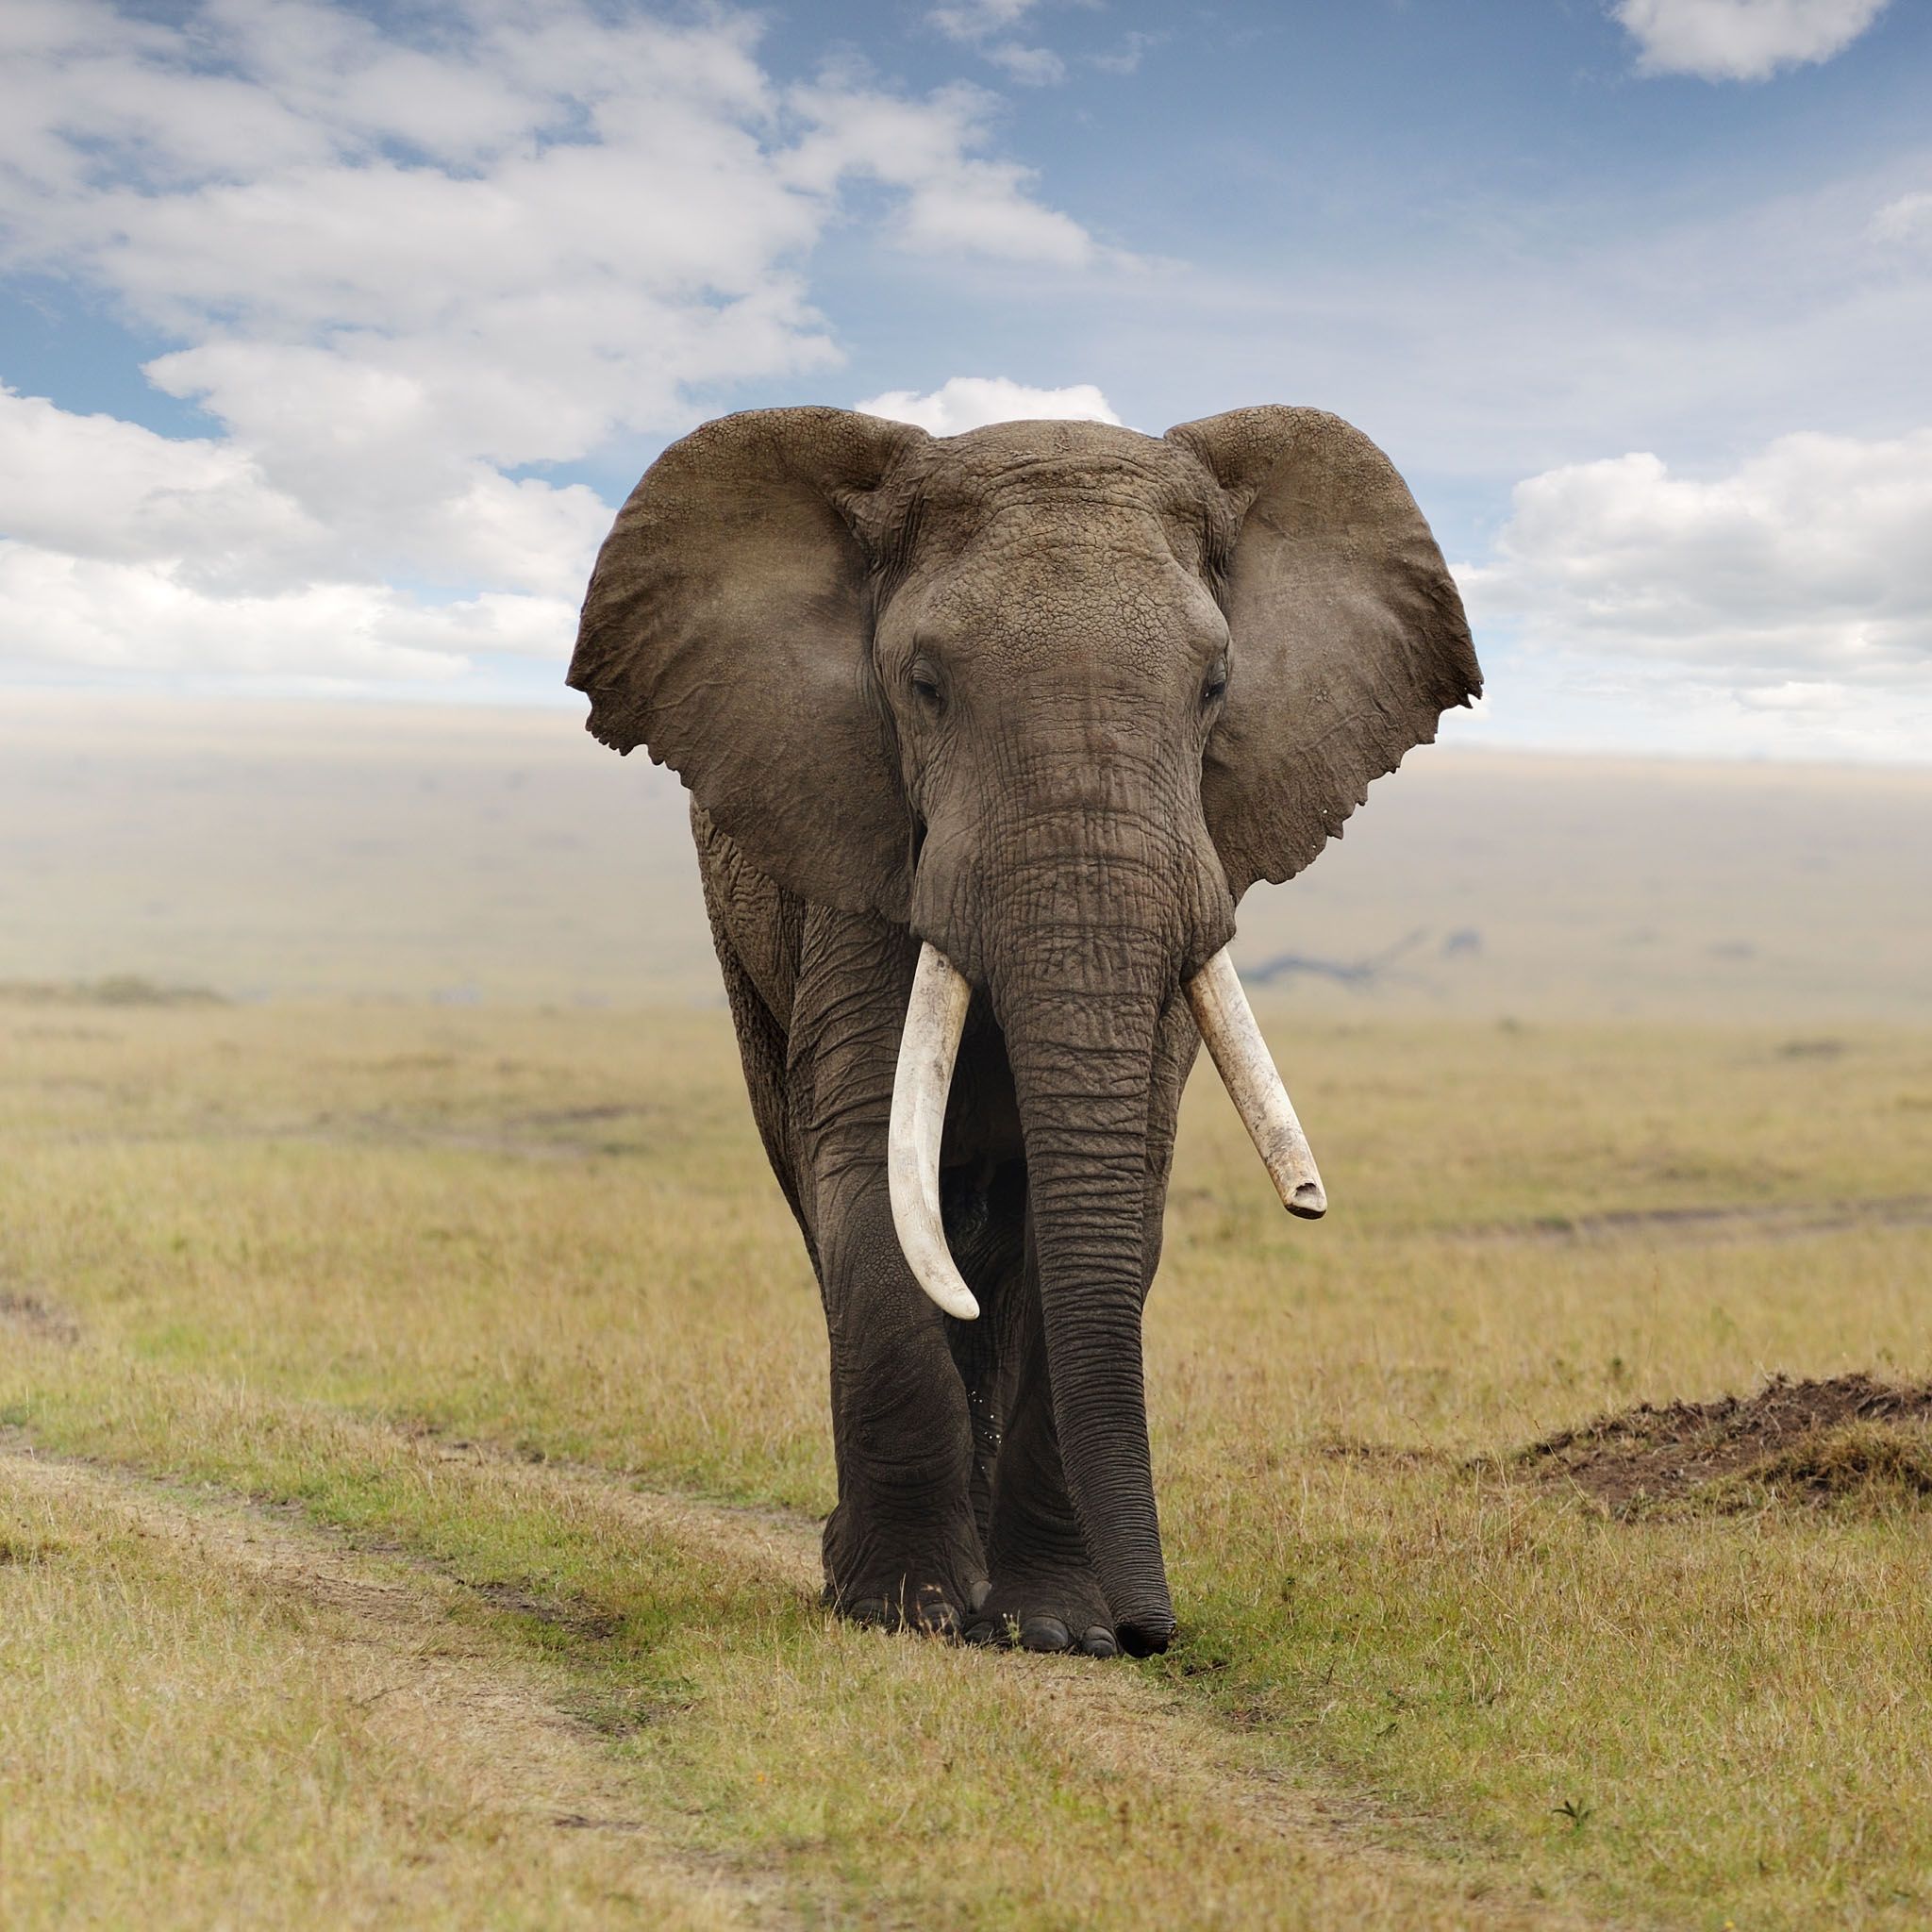 A full-sized elephant can lift objects of around 500 pounds with ...